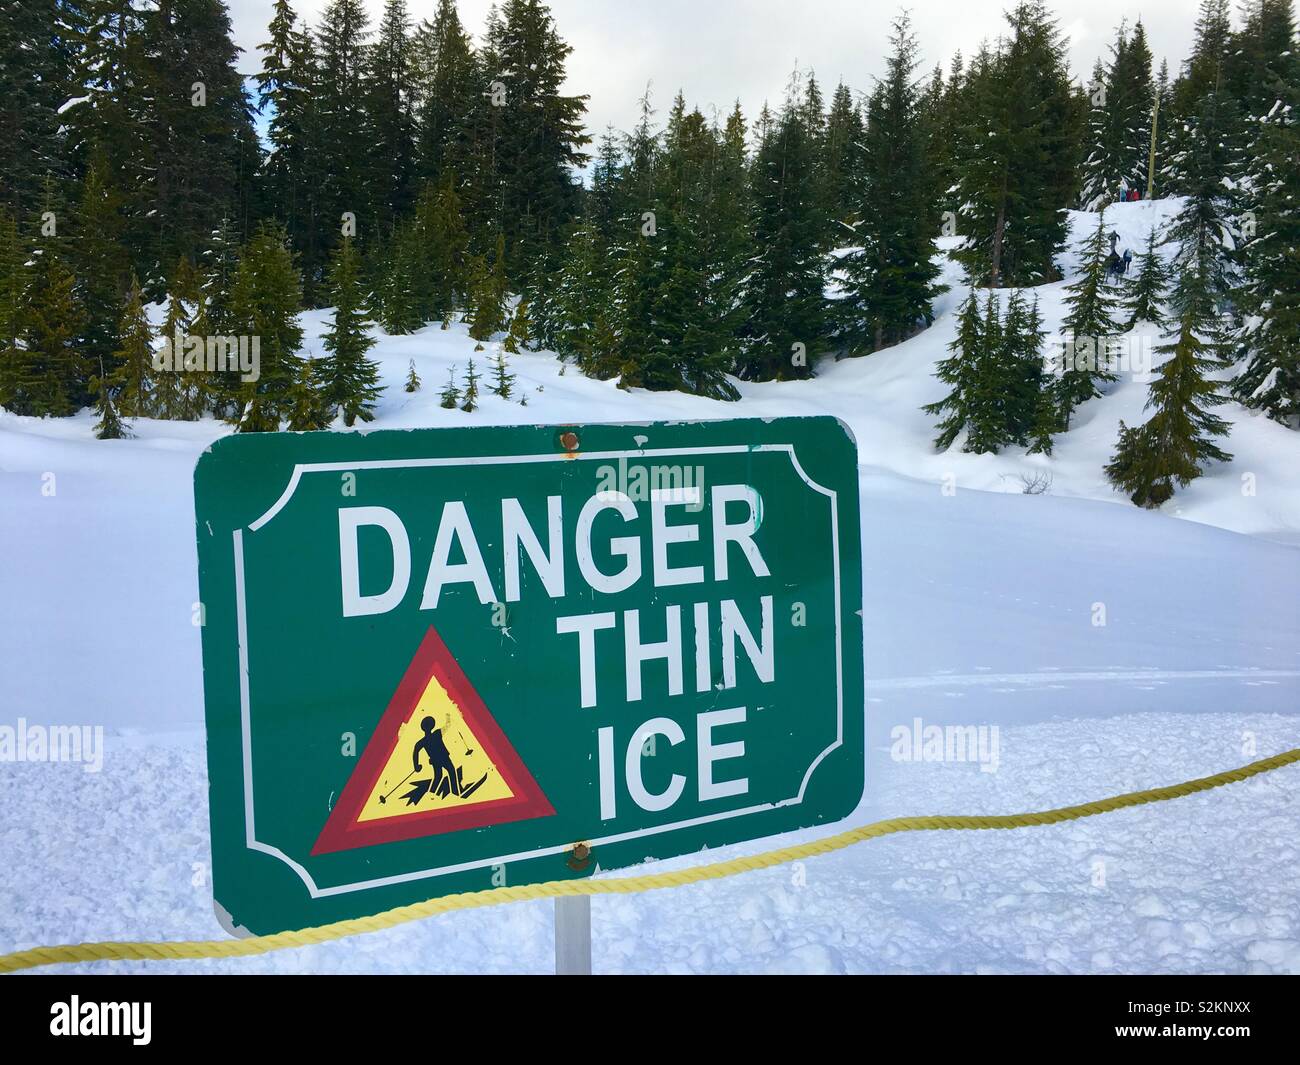 Danger Thin Ice sign, Cypress Mountain, Vancouver, British Columbia, Canada Stock Photo